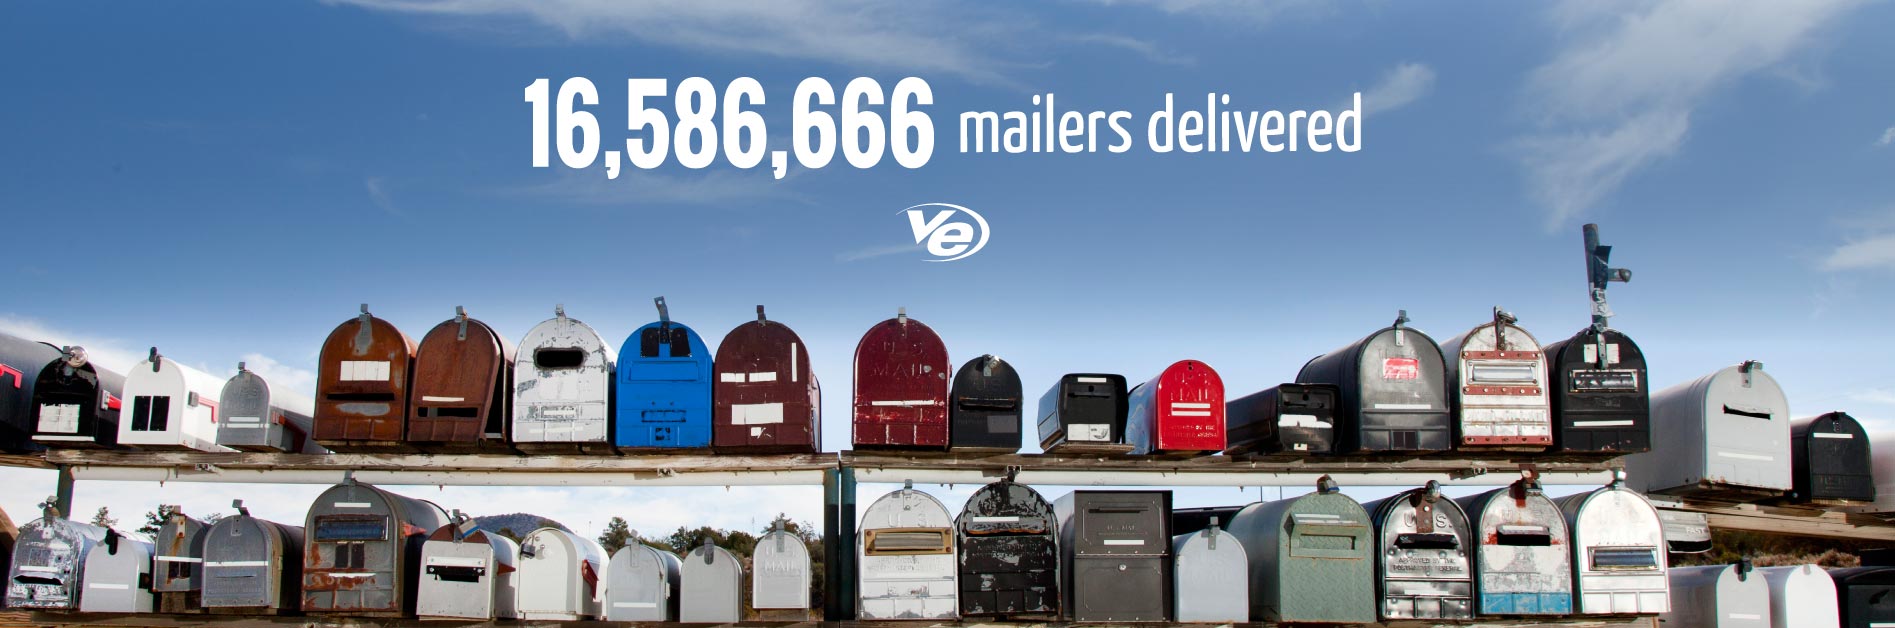 Over 16m mailers delivered